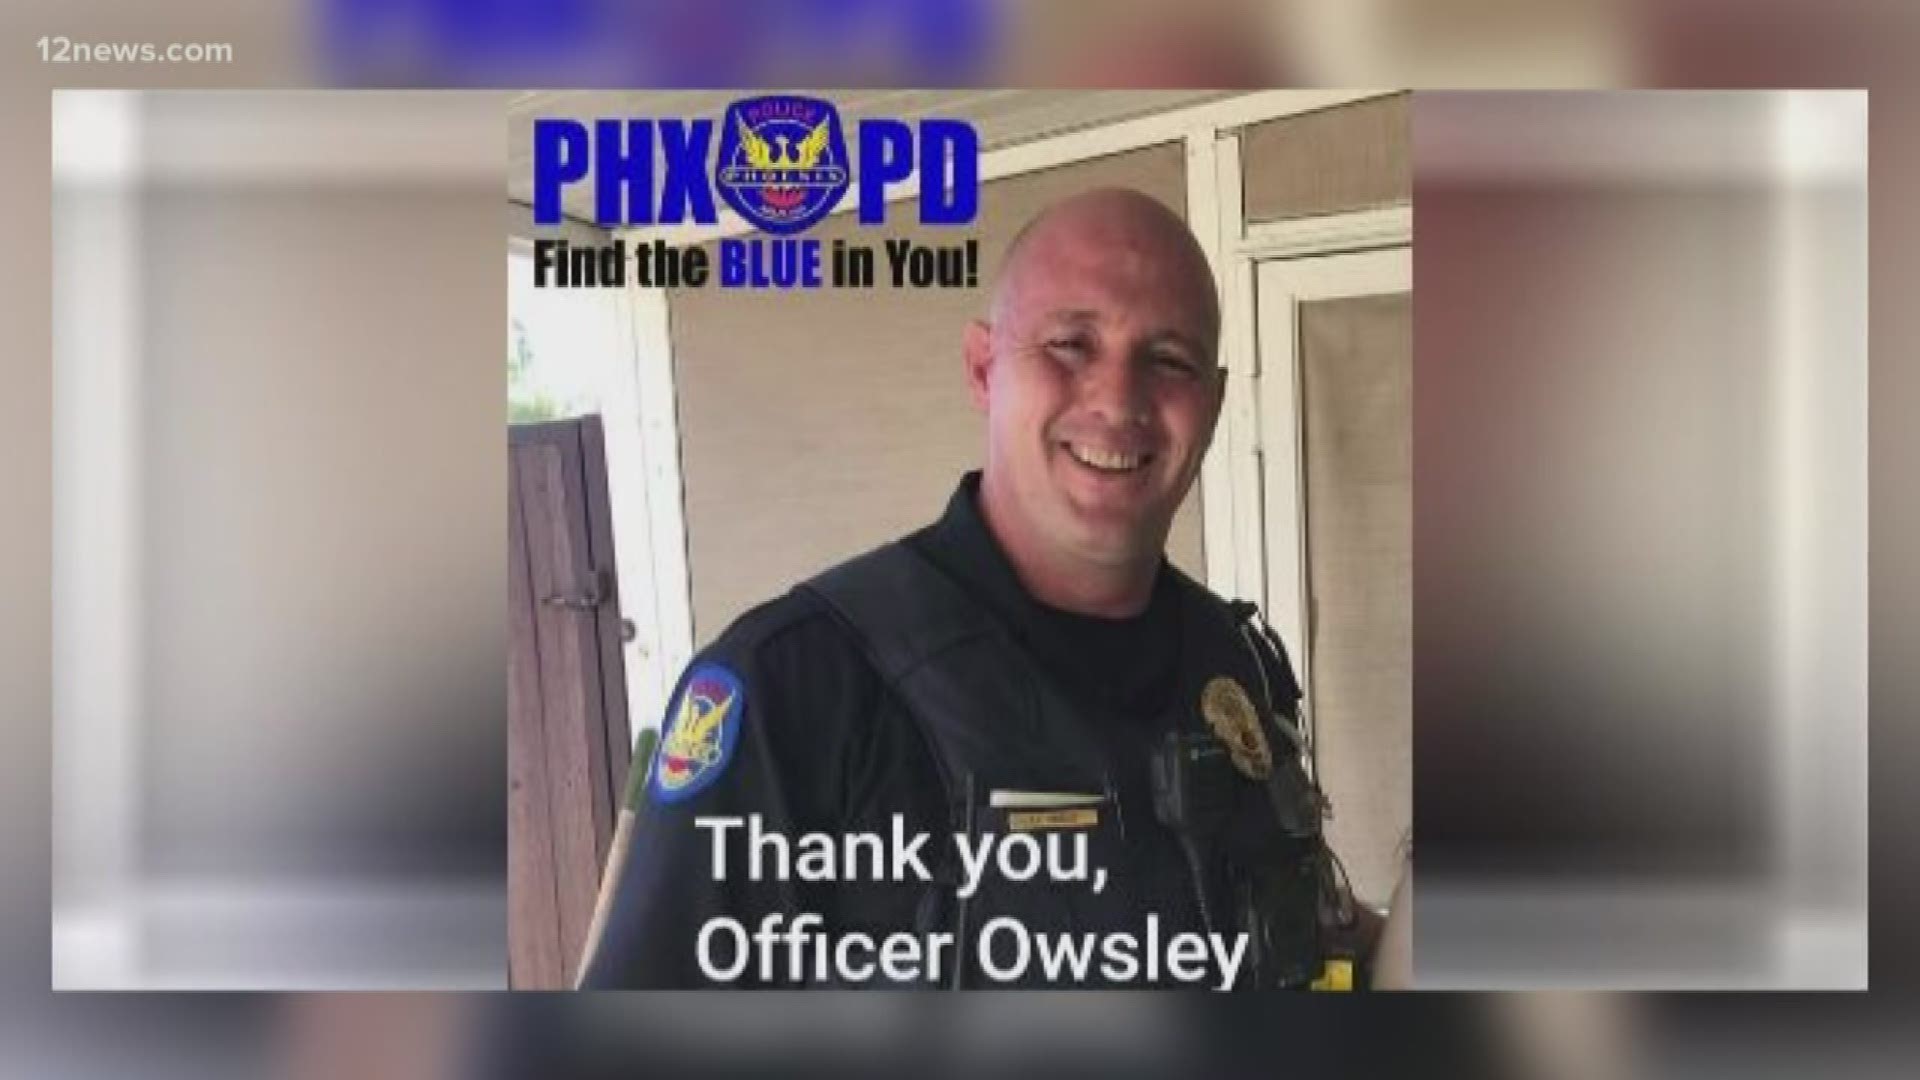 The men and women of the Phoenix police department are challenged daily as they respond to all sorts of calls. One officer received a letter of thanks from one member of the community that he says makes every sacrifice worth it.